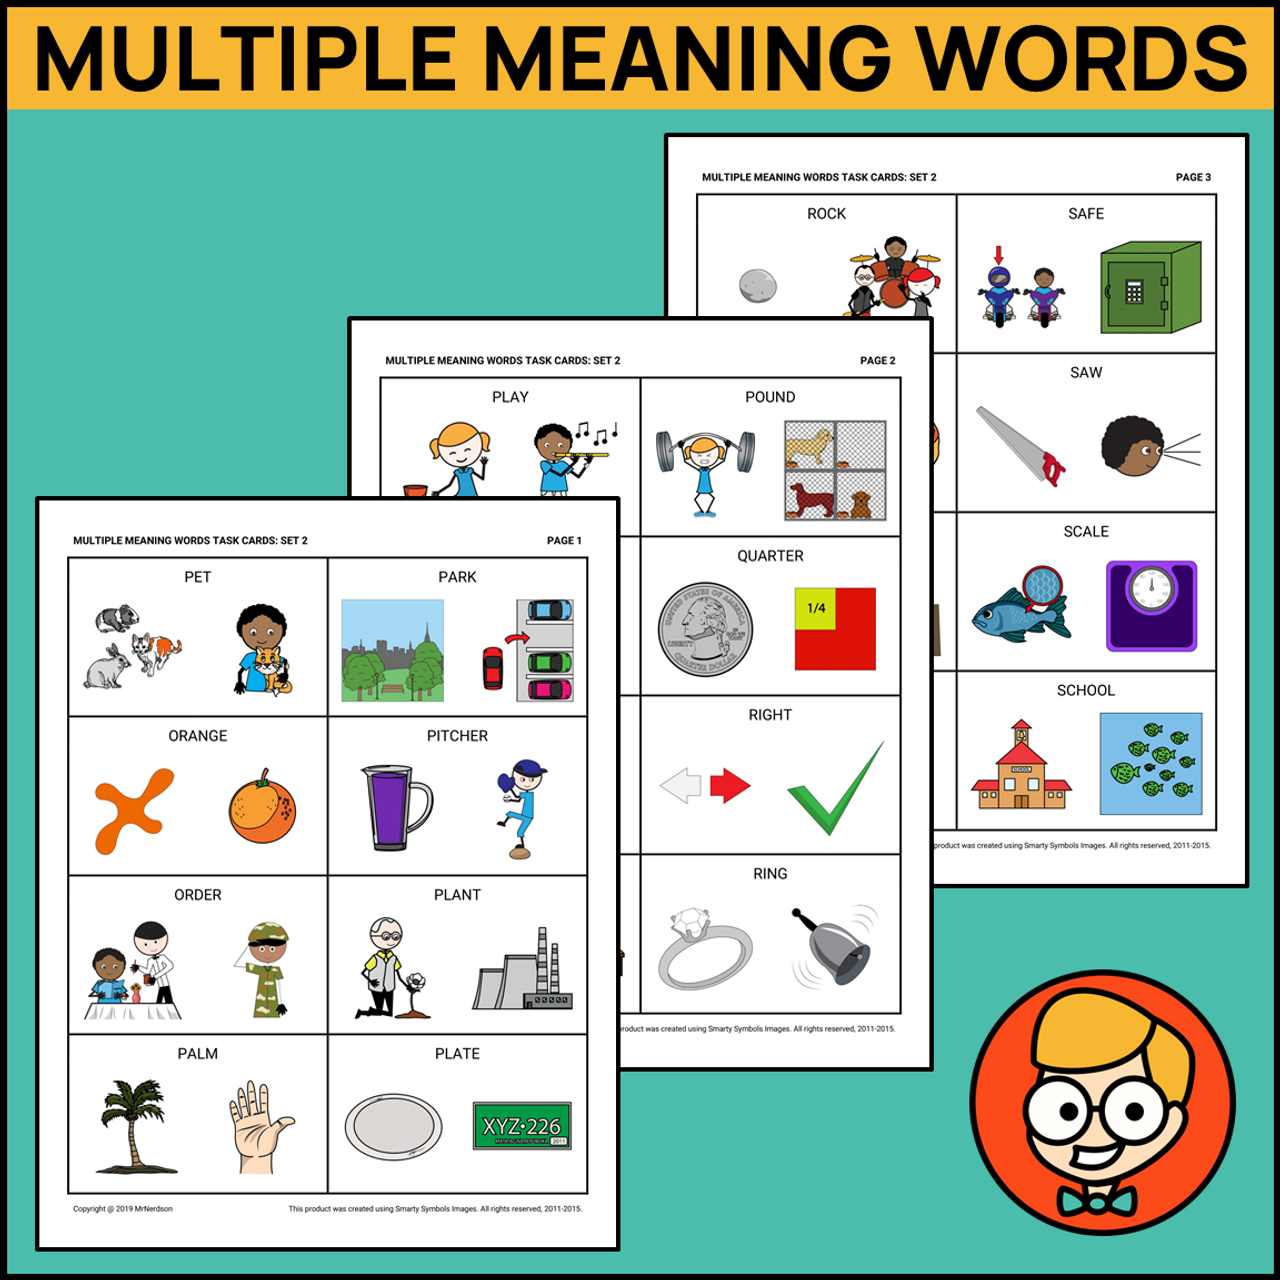 Multiple Meaning Words Task Cards - Set 2